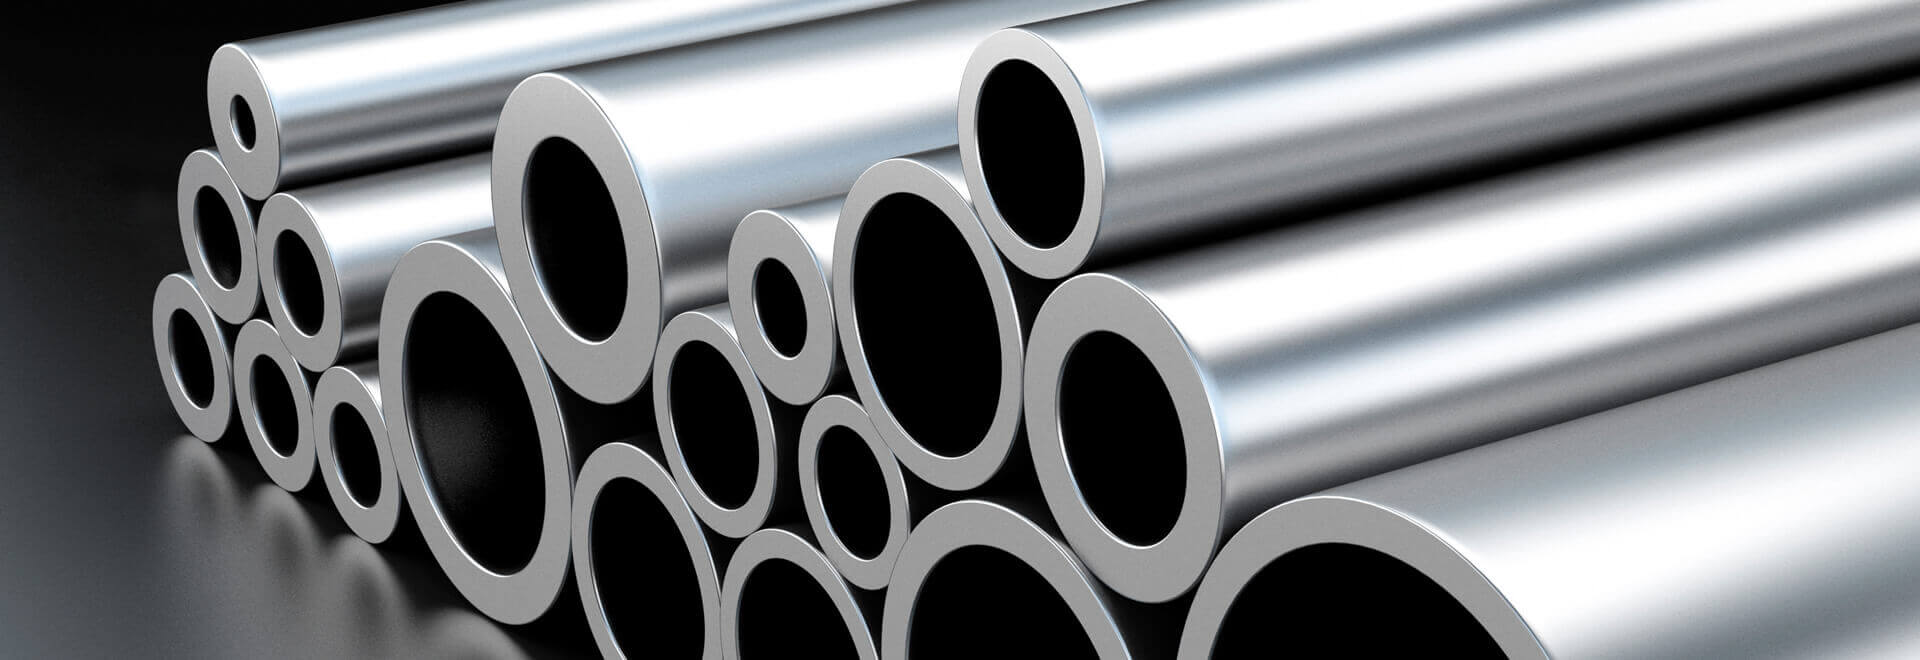 Pipes and Tubes Suppliers in Abu Dhabi